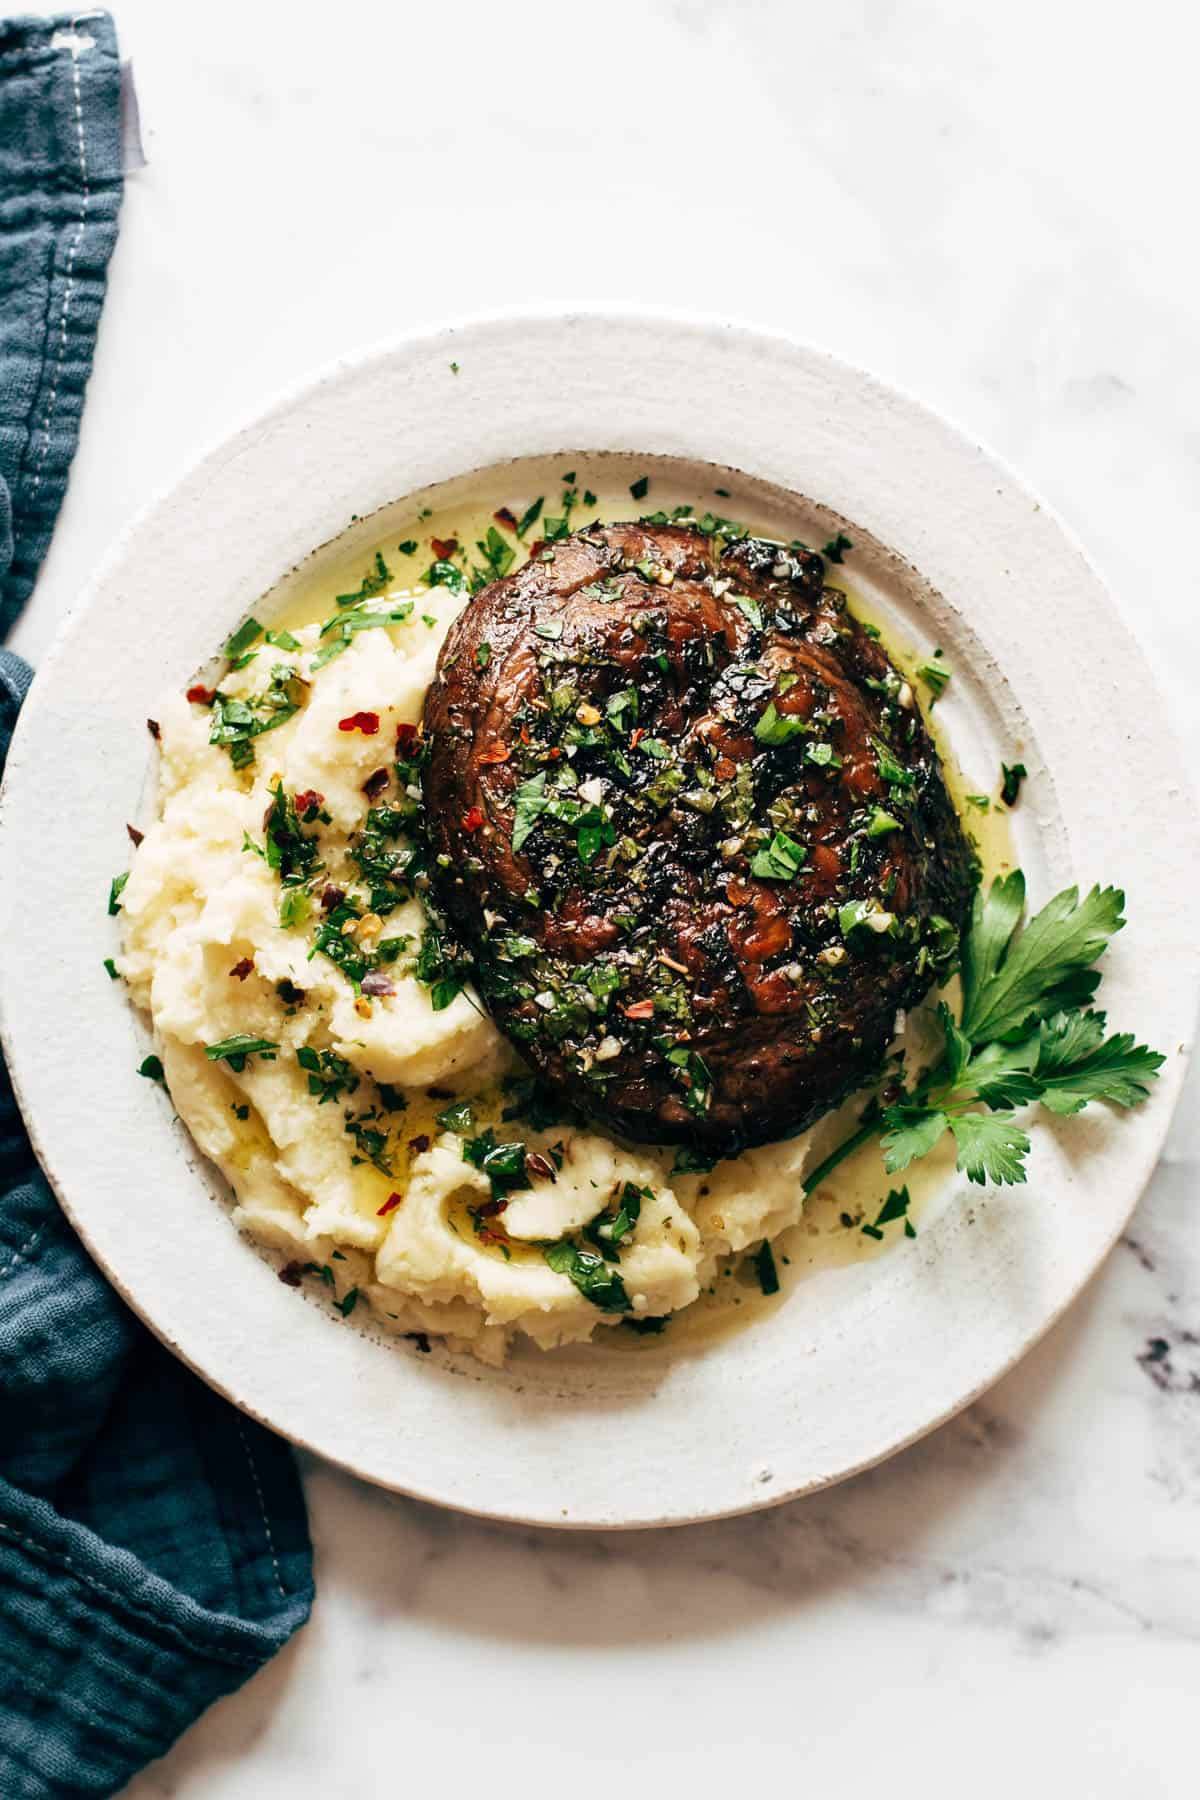 Grilled portable mushroom on a bed of mashed potatoes with lots of herbs.